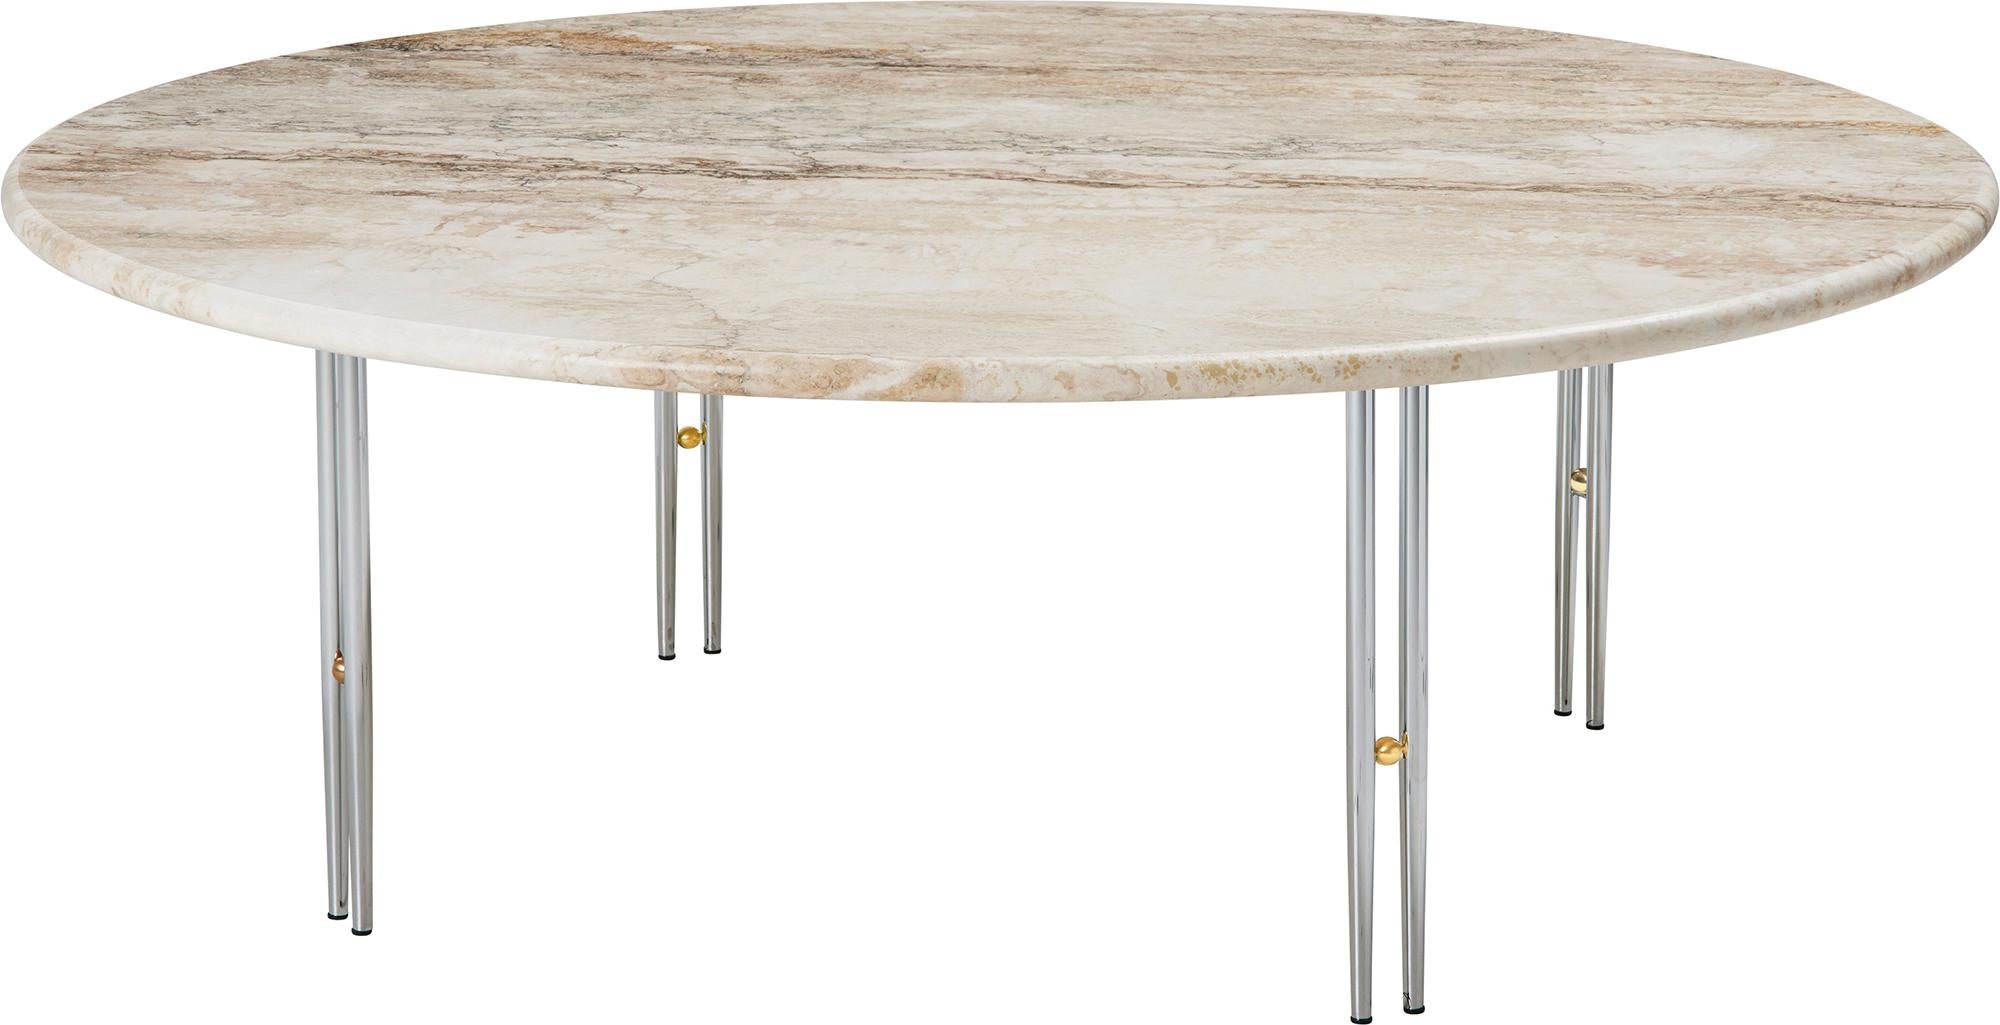 Large ‘IOI’ Travertine Coffee Table by GamFratesi for GUBI For Sale 8